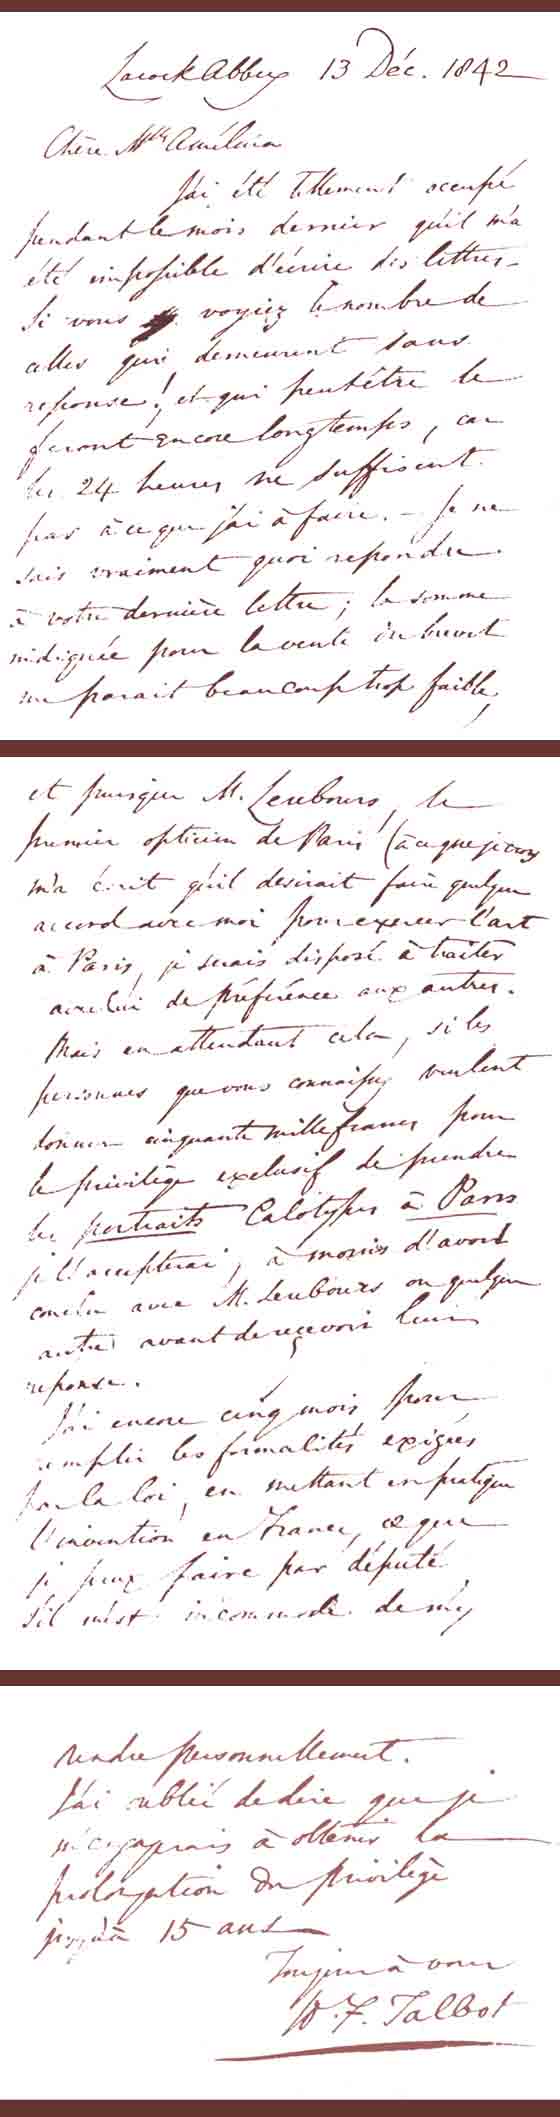 A letter from Fox Talbot to Amélina, writen in 1843, requesting her assistance in promoting his photographic techniques in France